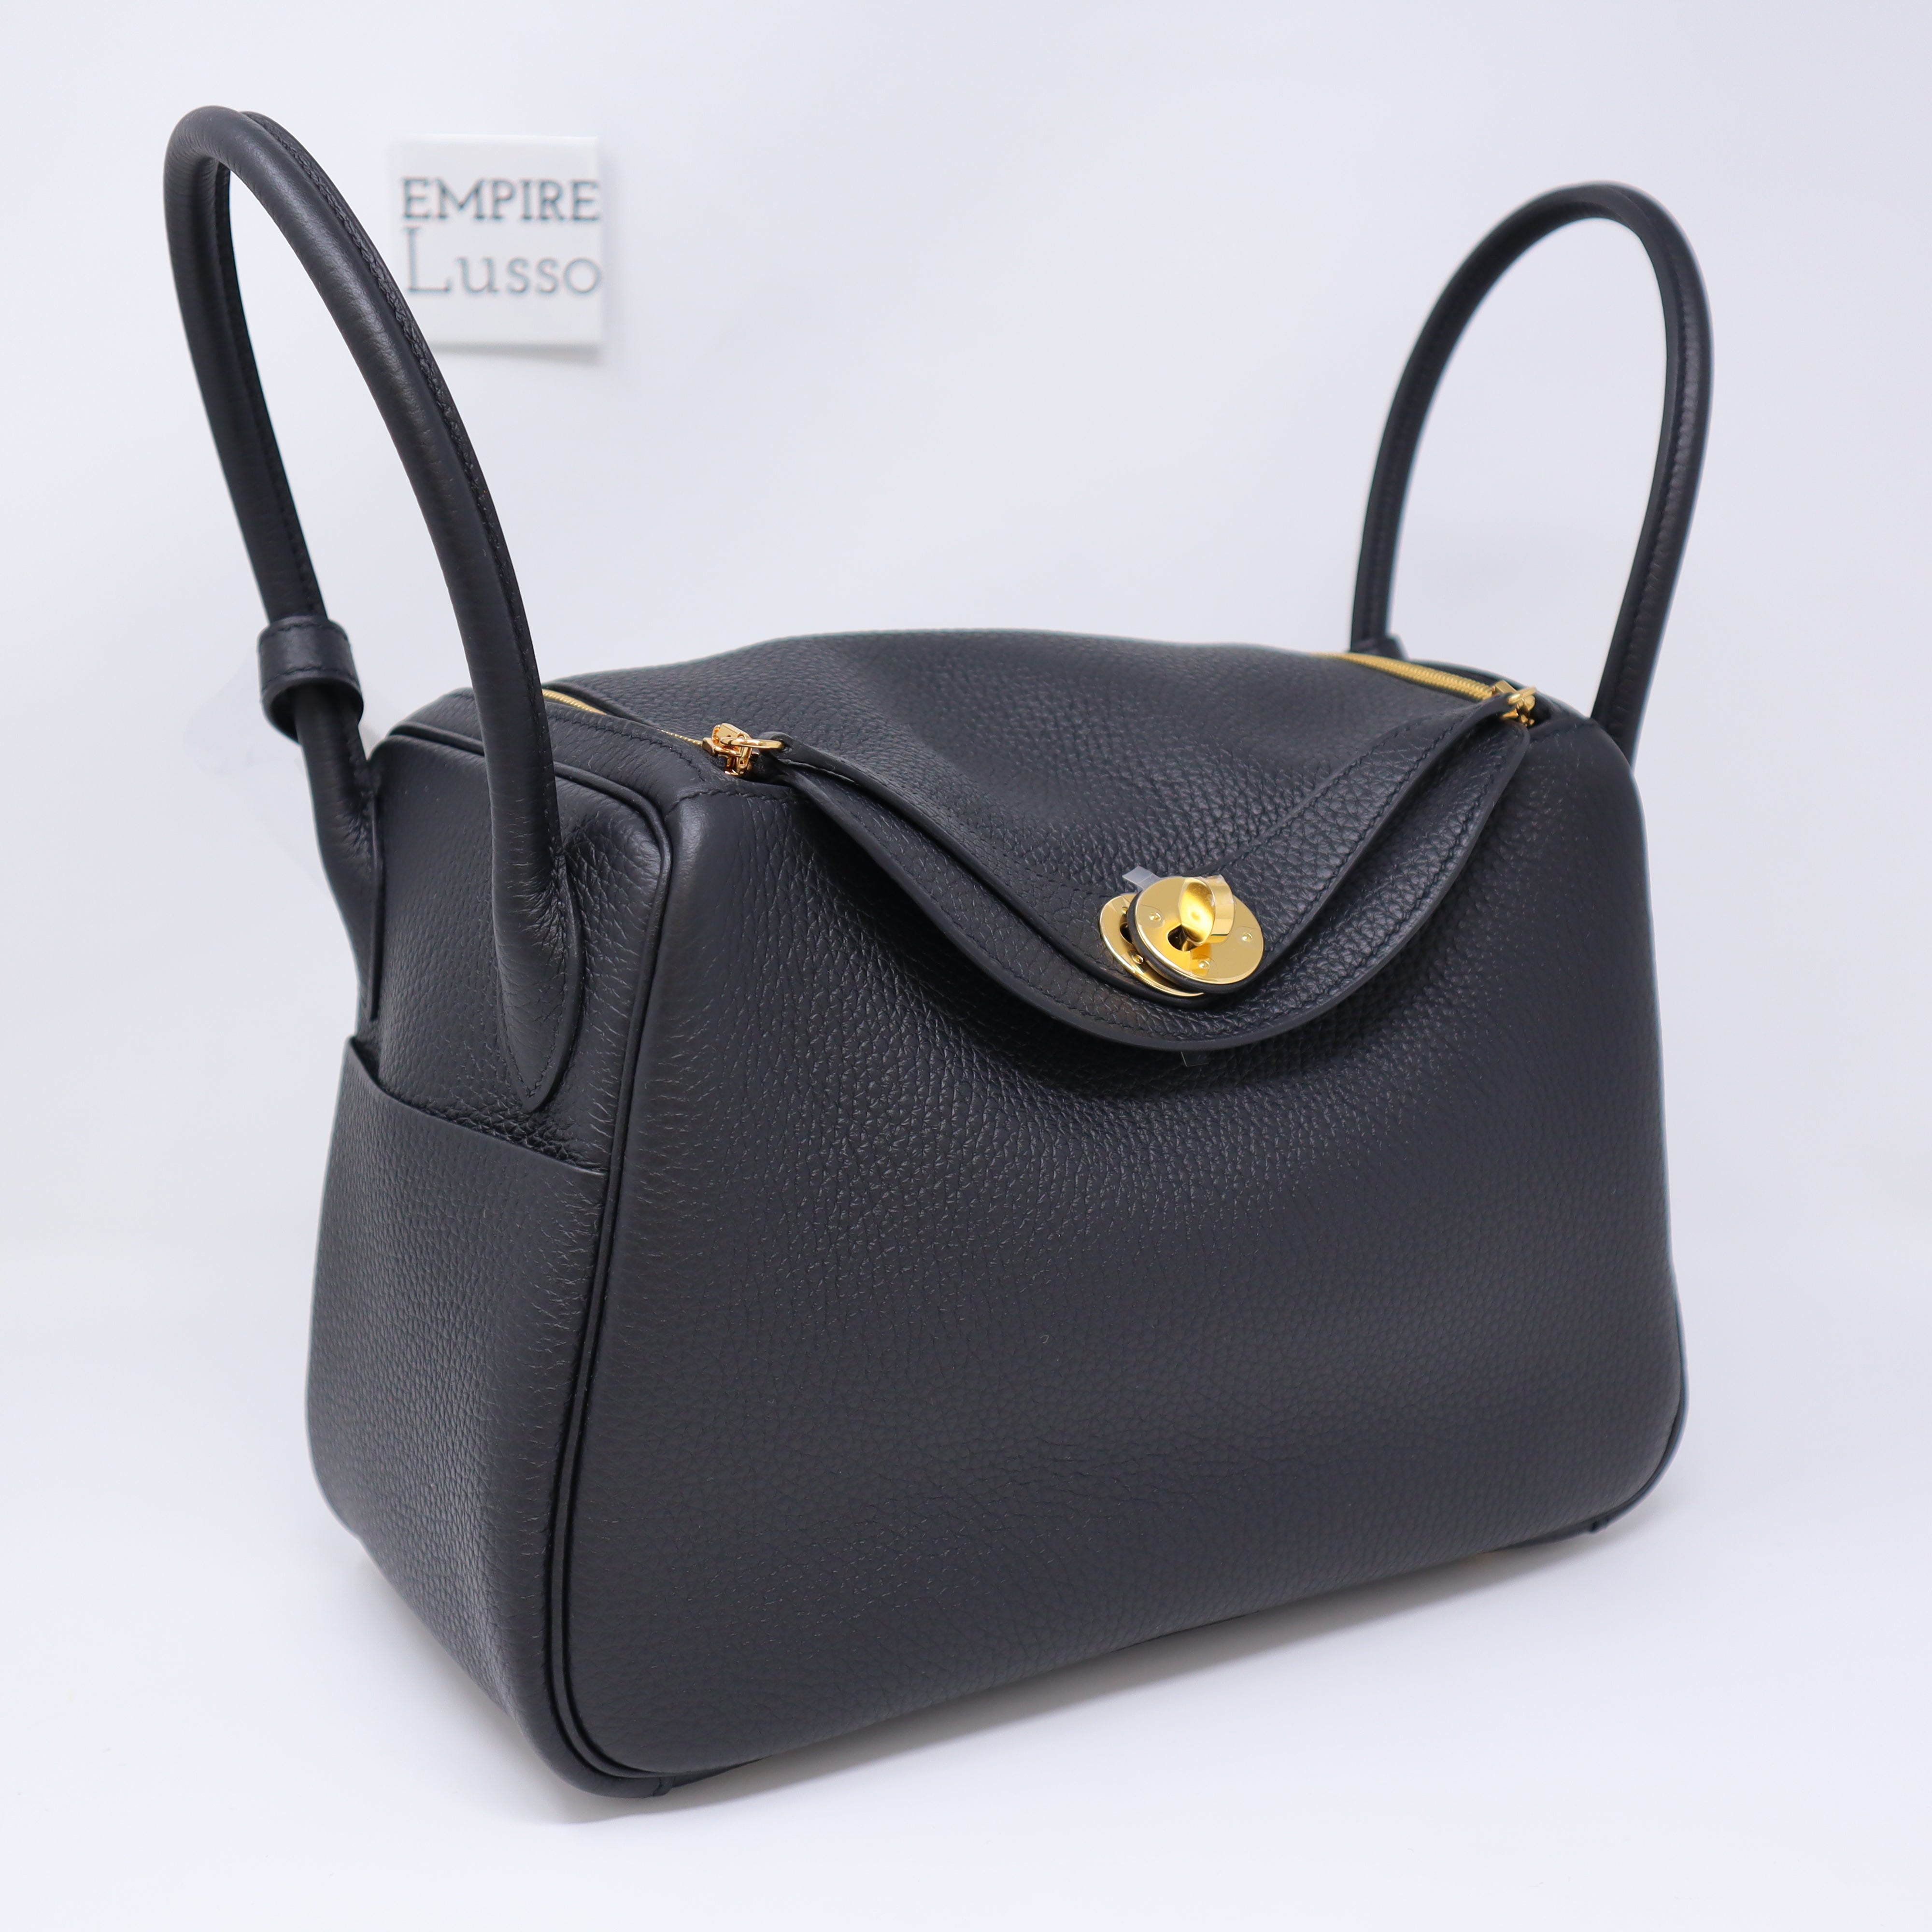 HERMÈS, BLACK RETOURNE KELLY 32CM OF CLEMENCE LEATHER WITH GOLD HARDWARE, Handbags & Accessories, 2020